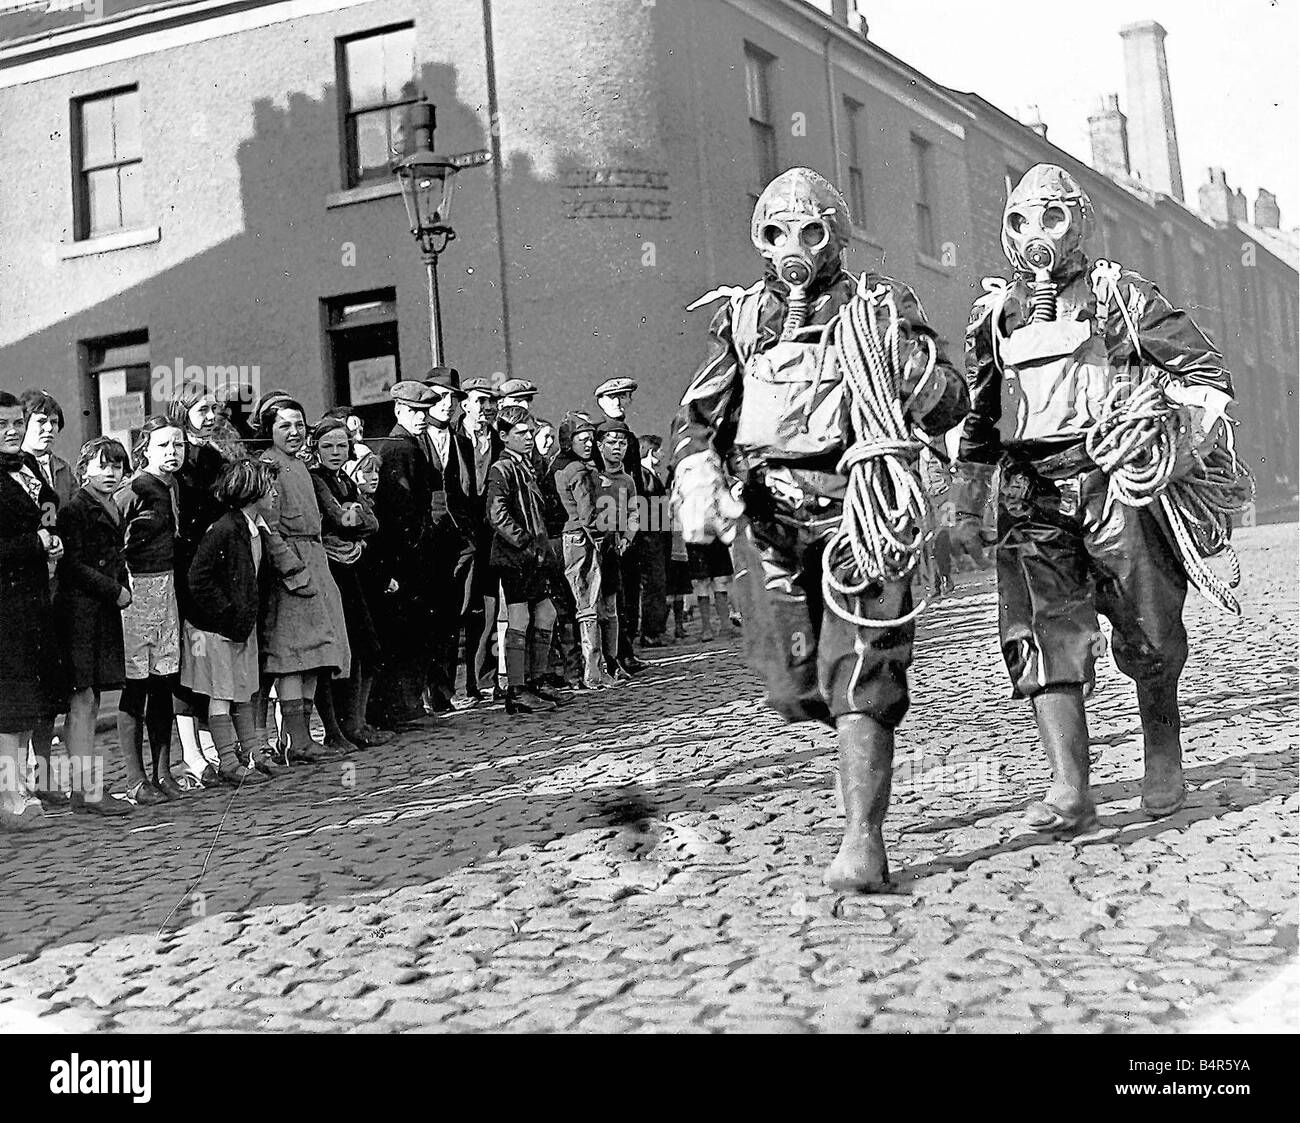 Two air raid wardens cause a stir as they stroll in February 1939 in full regalia Stock Photo